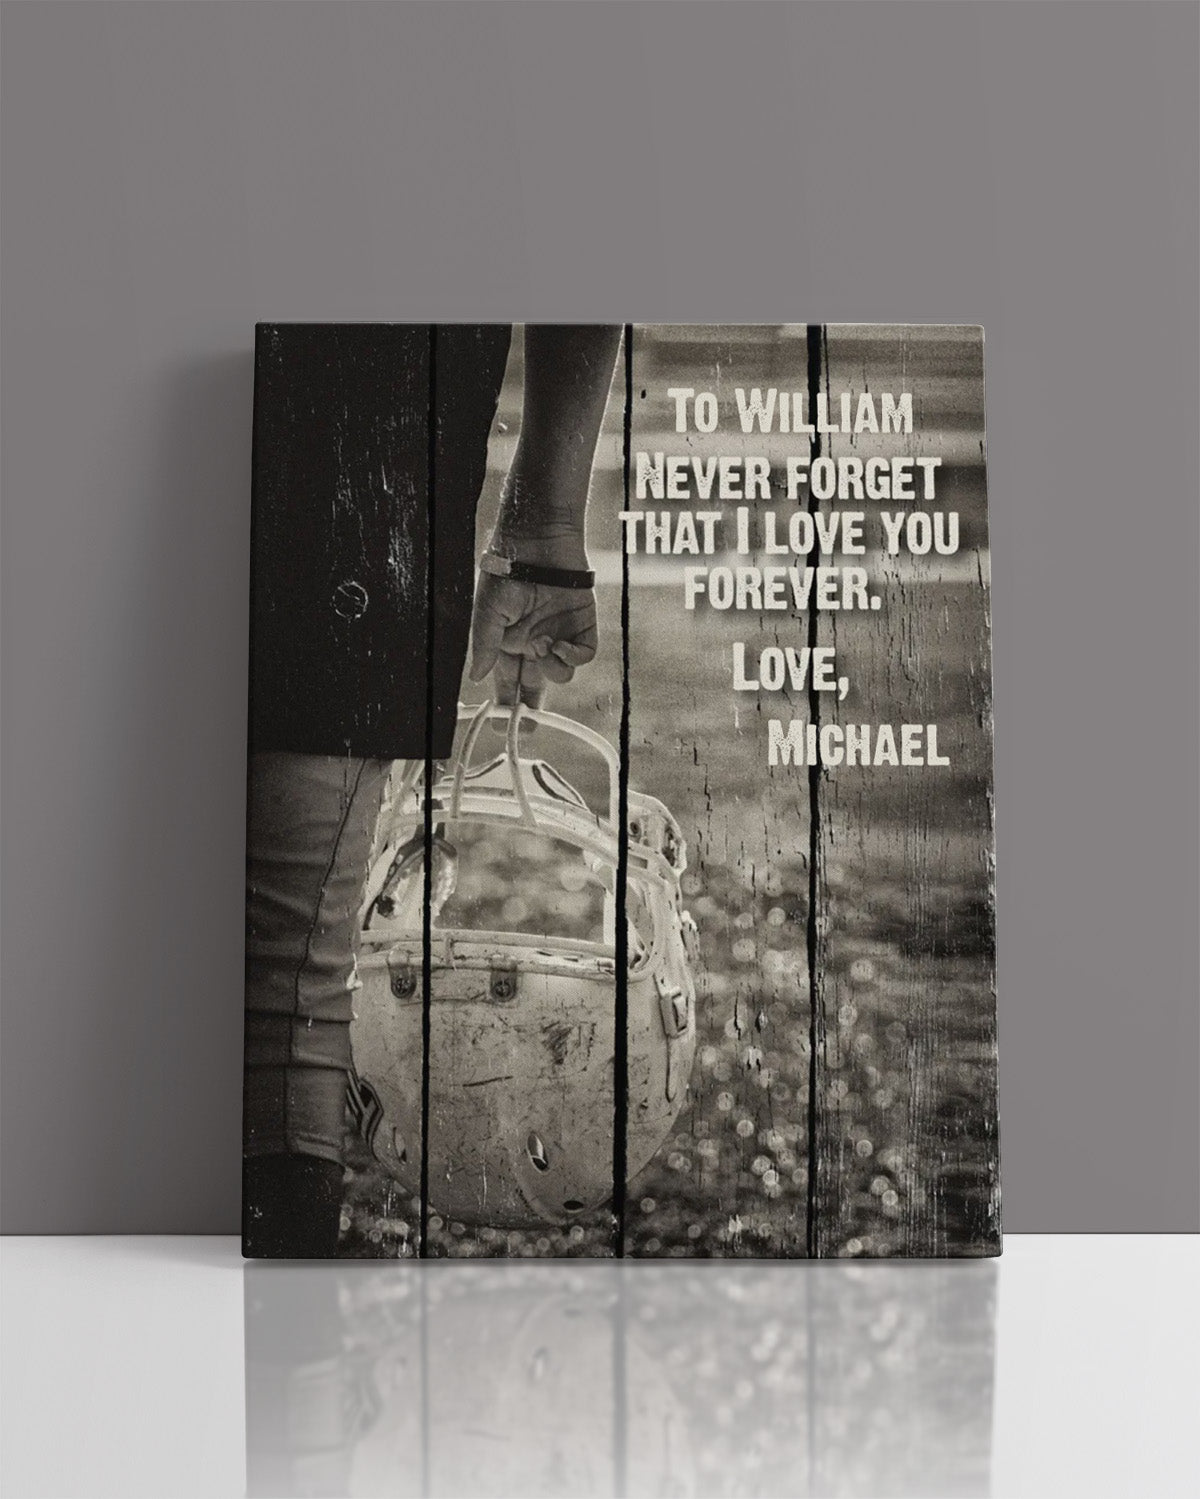 Customizable Football Theme Wall Decor Art Canvas Print - To (NAME) Never Forget That I Love You Forever. Love, (YOUR NAME)